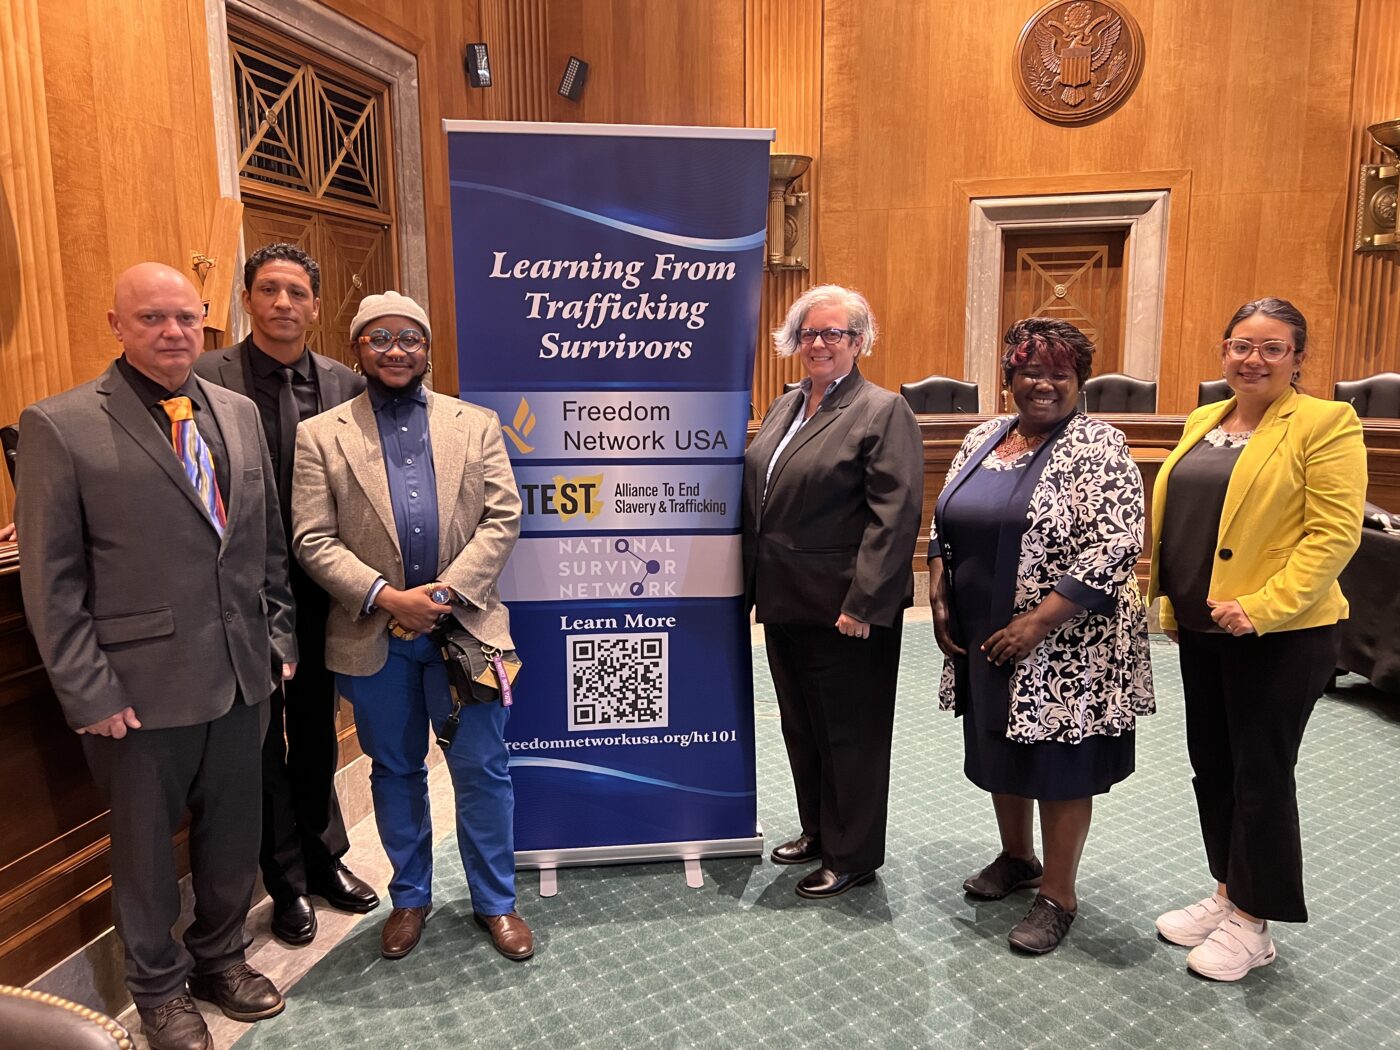 Six stunning experts with lived experience stand next to a banner in the Senate Foreign Relations Committee Hearing Room. The banner reads Learning from Lived Experience